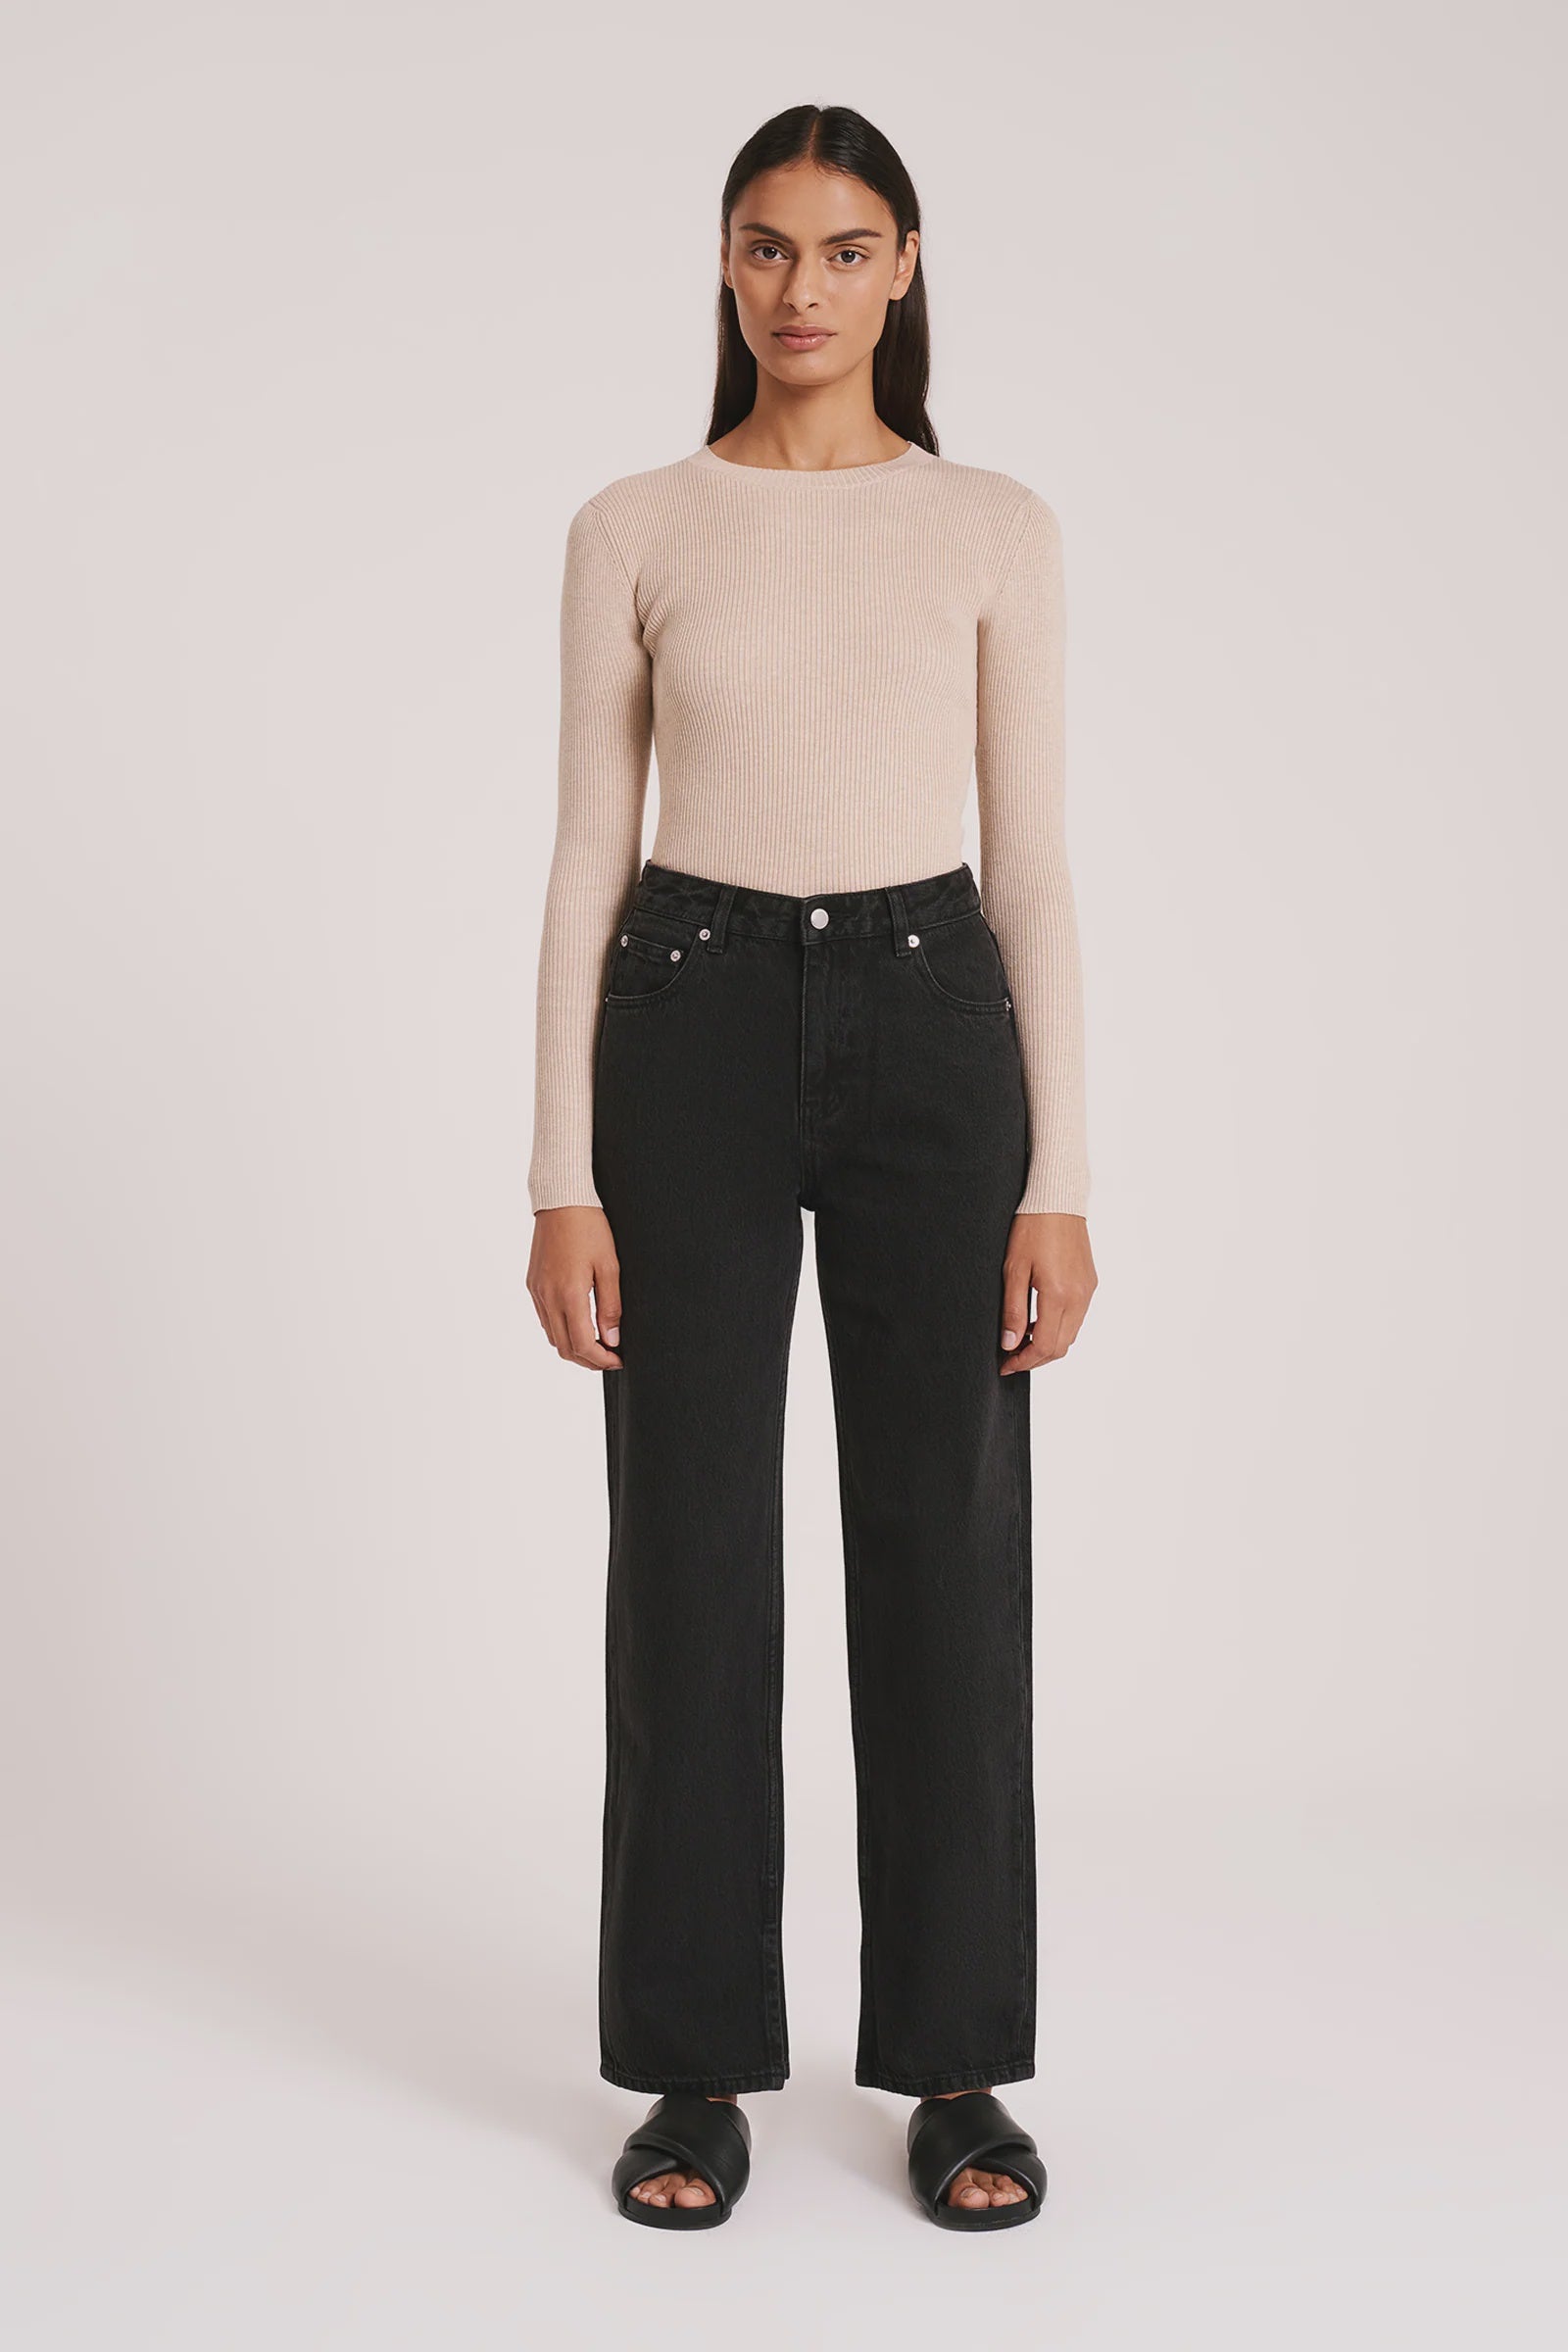 Nude Lucy | Organic Low Rise Jean - Vintage Black